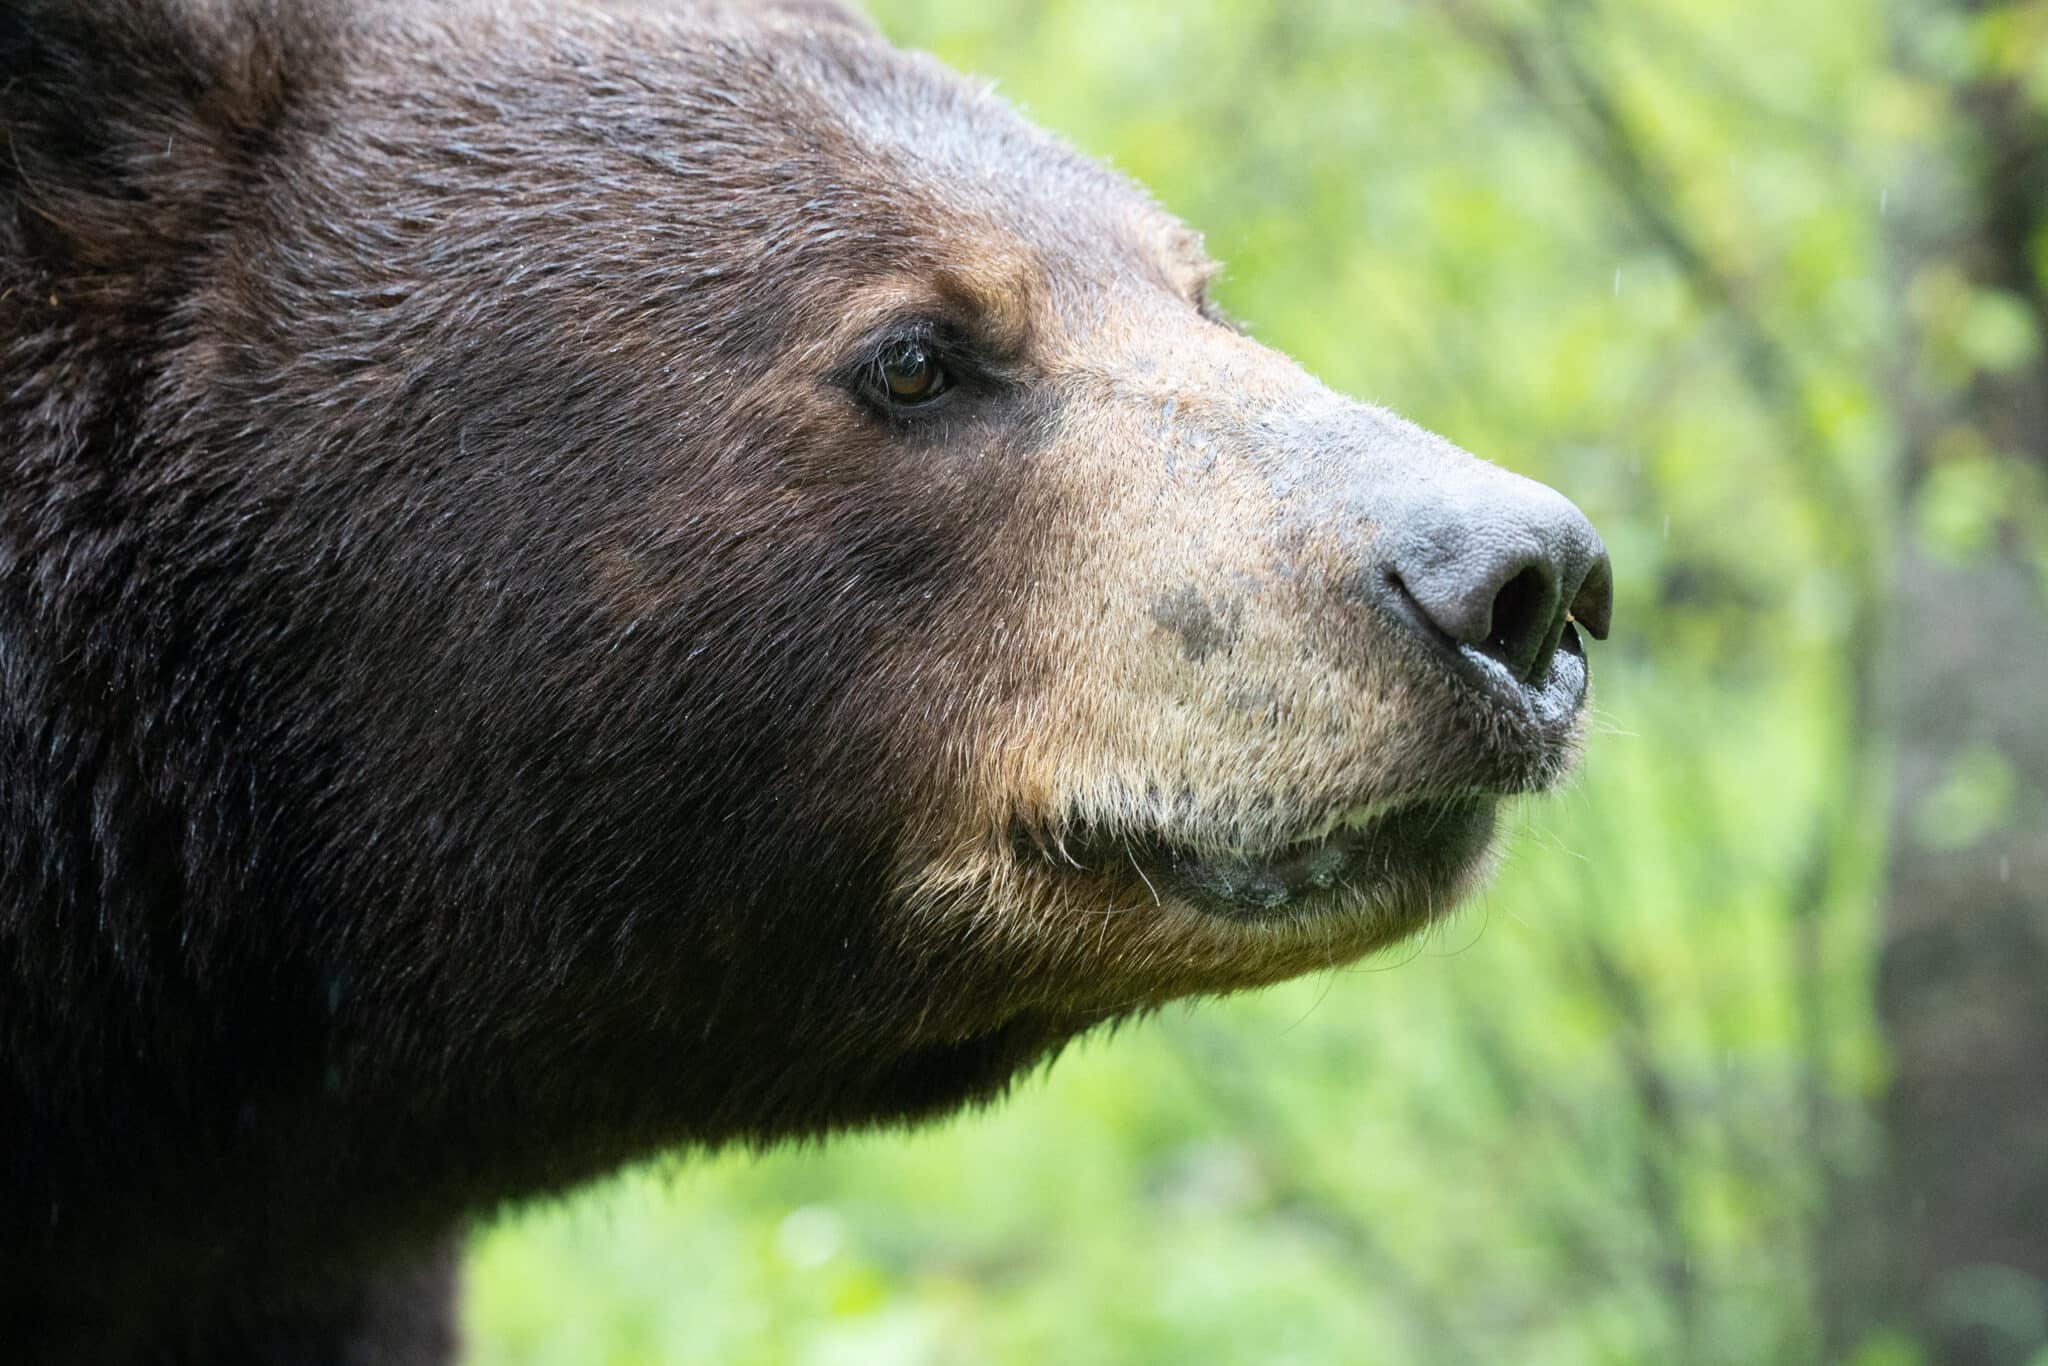 A close-up shot of a black bear in Wisconsin.